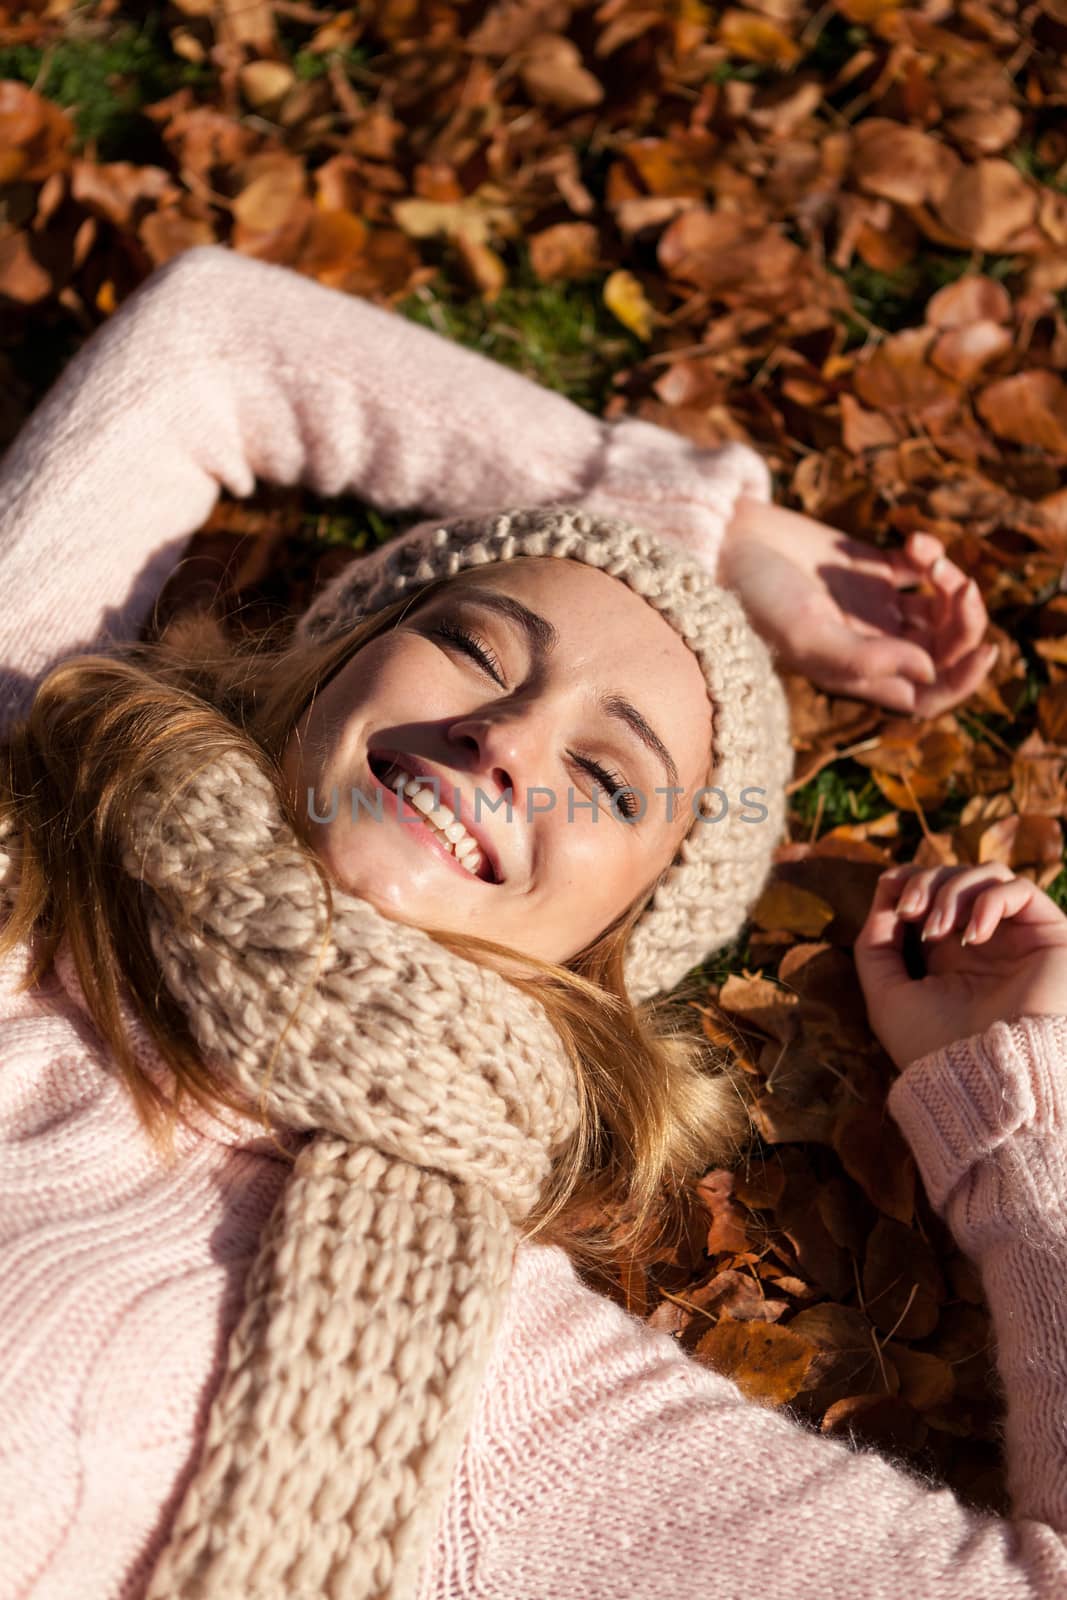 young smiling woman with hat and scarf outdoor in autumn nature background